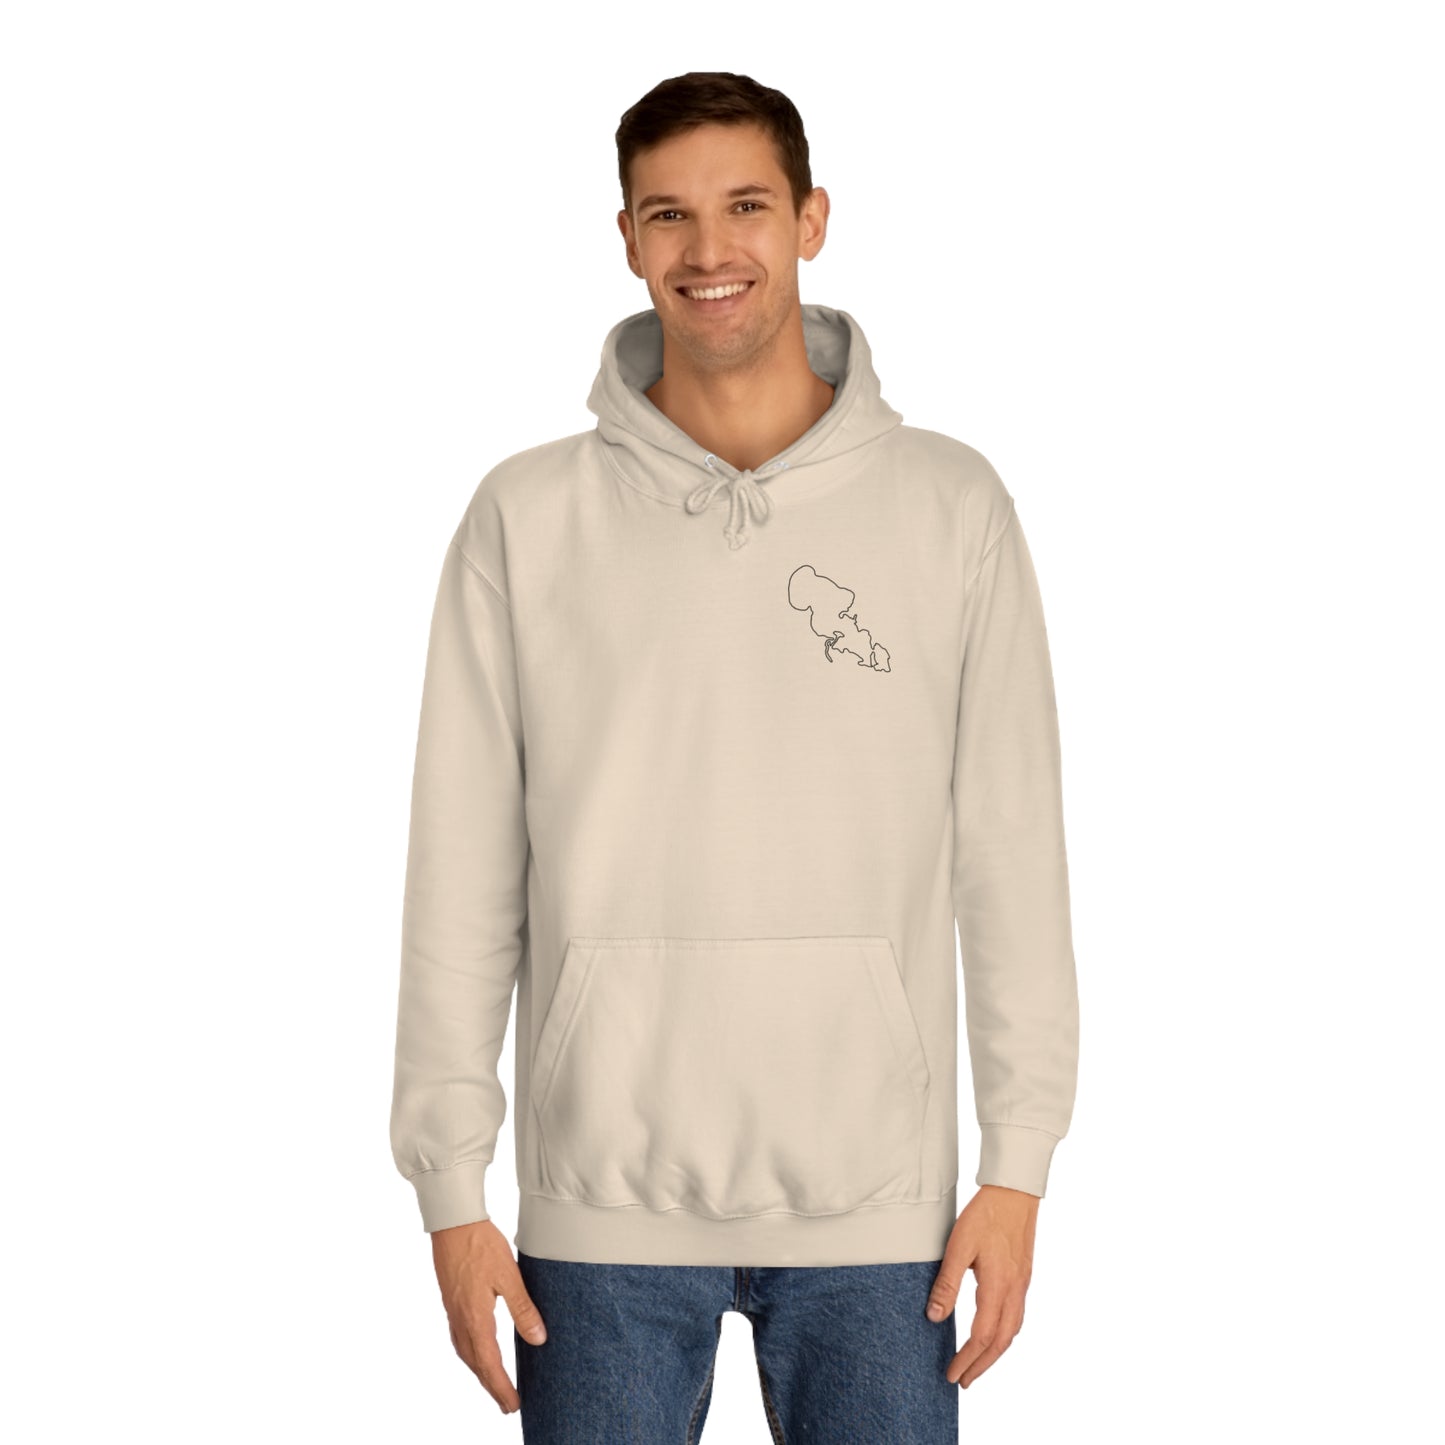 Wakeboard Float Plane - Lac LaBelle Unisex Hoodie Medium Weight